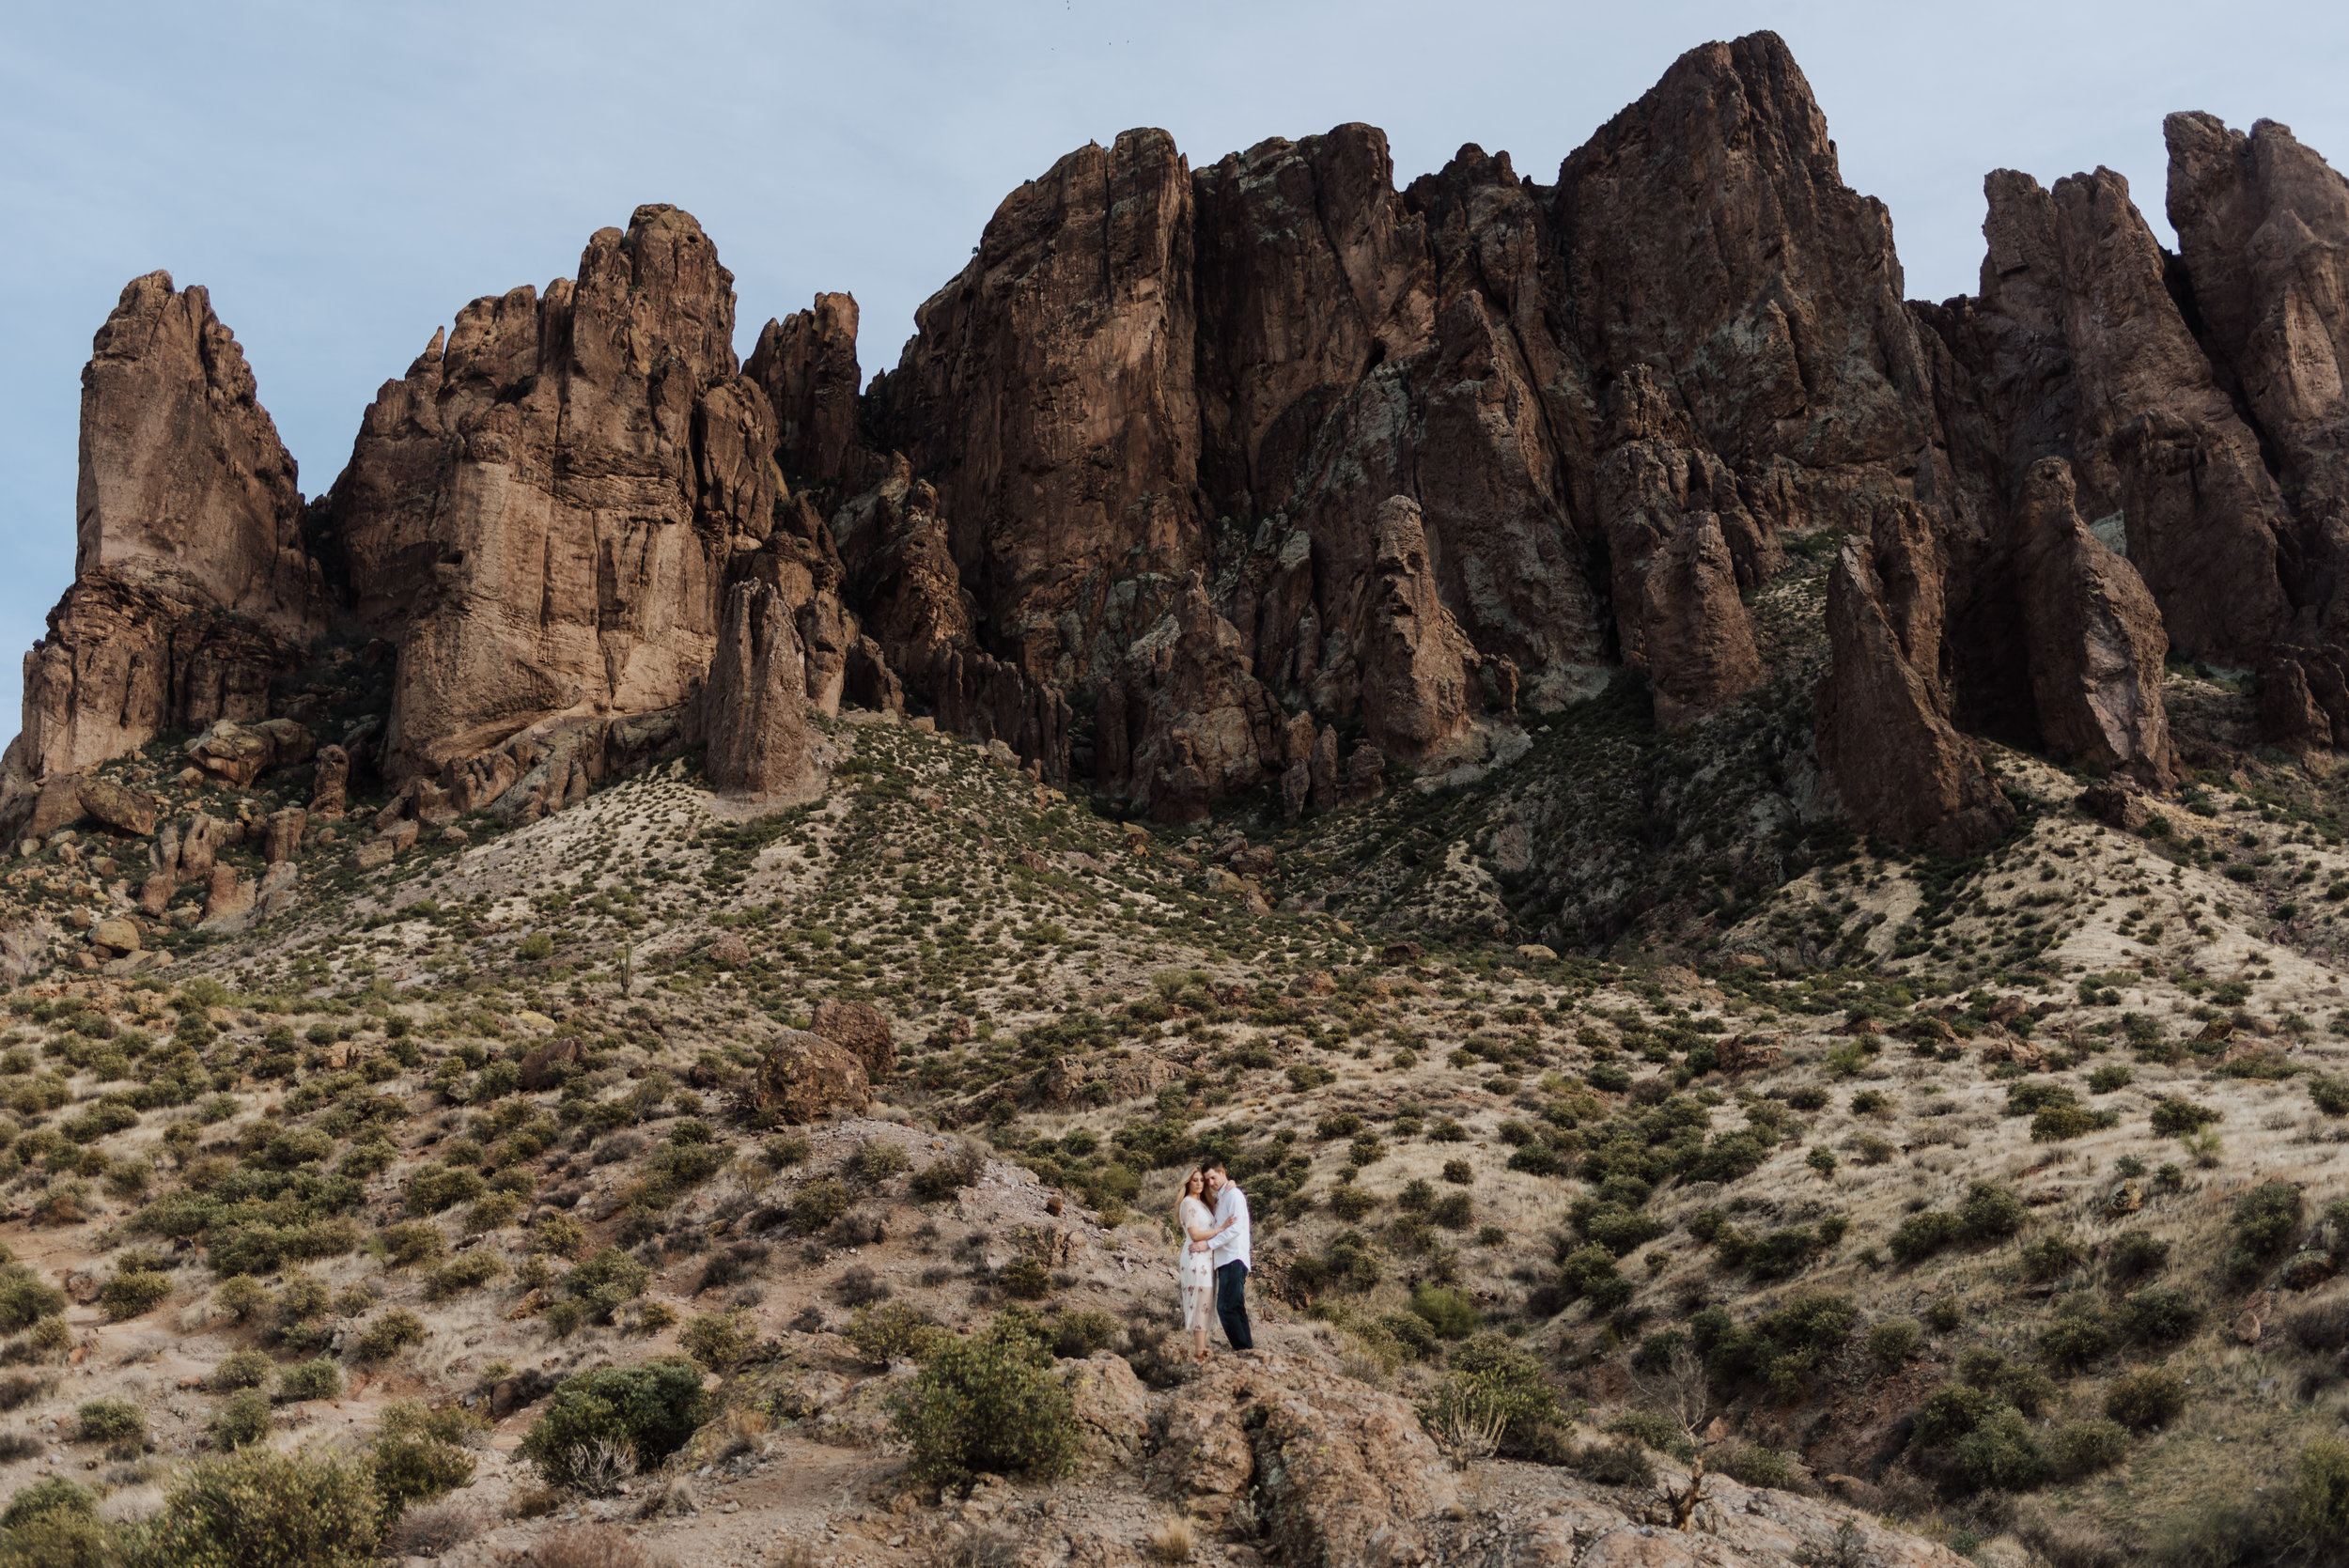 Engagement Photos at Superstition Mountains